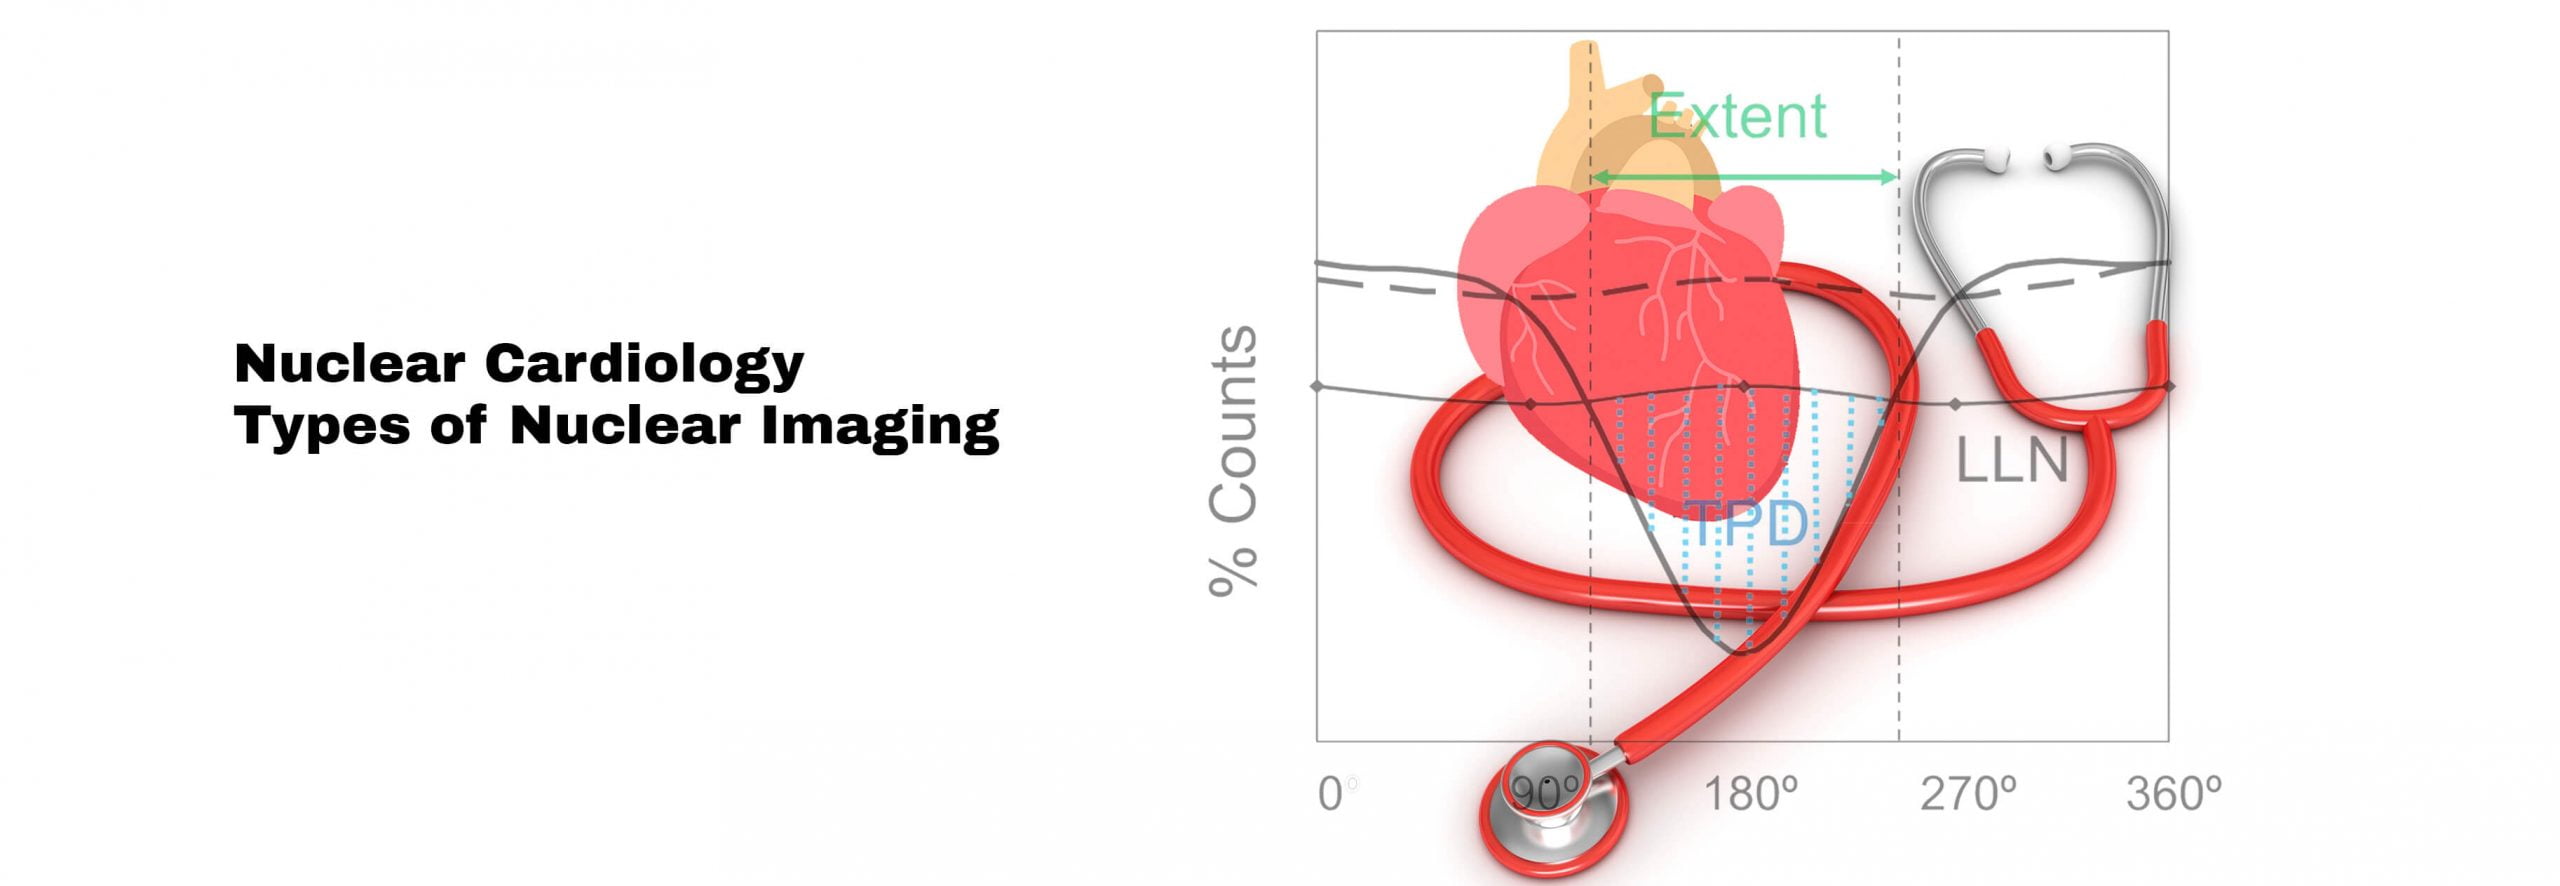 Nuclear Cardiology | Types of Nuclear Imaging ~ Statcardiologist